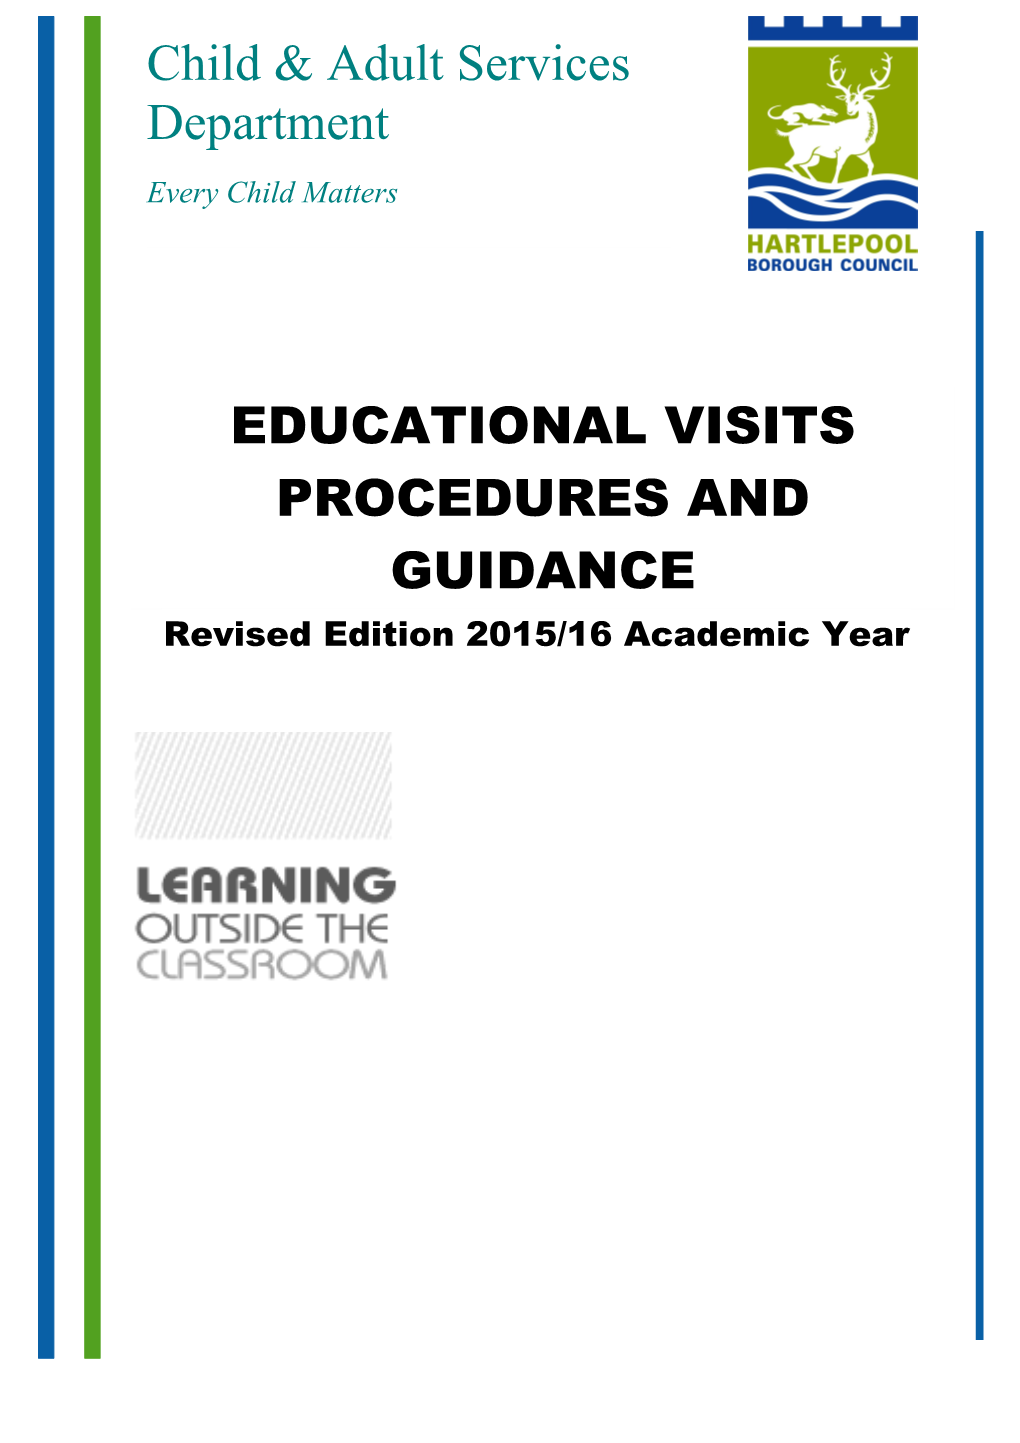 Educational Visits and Guidance